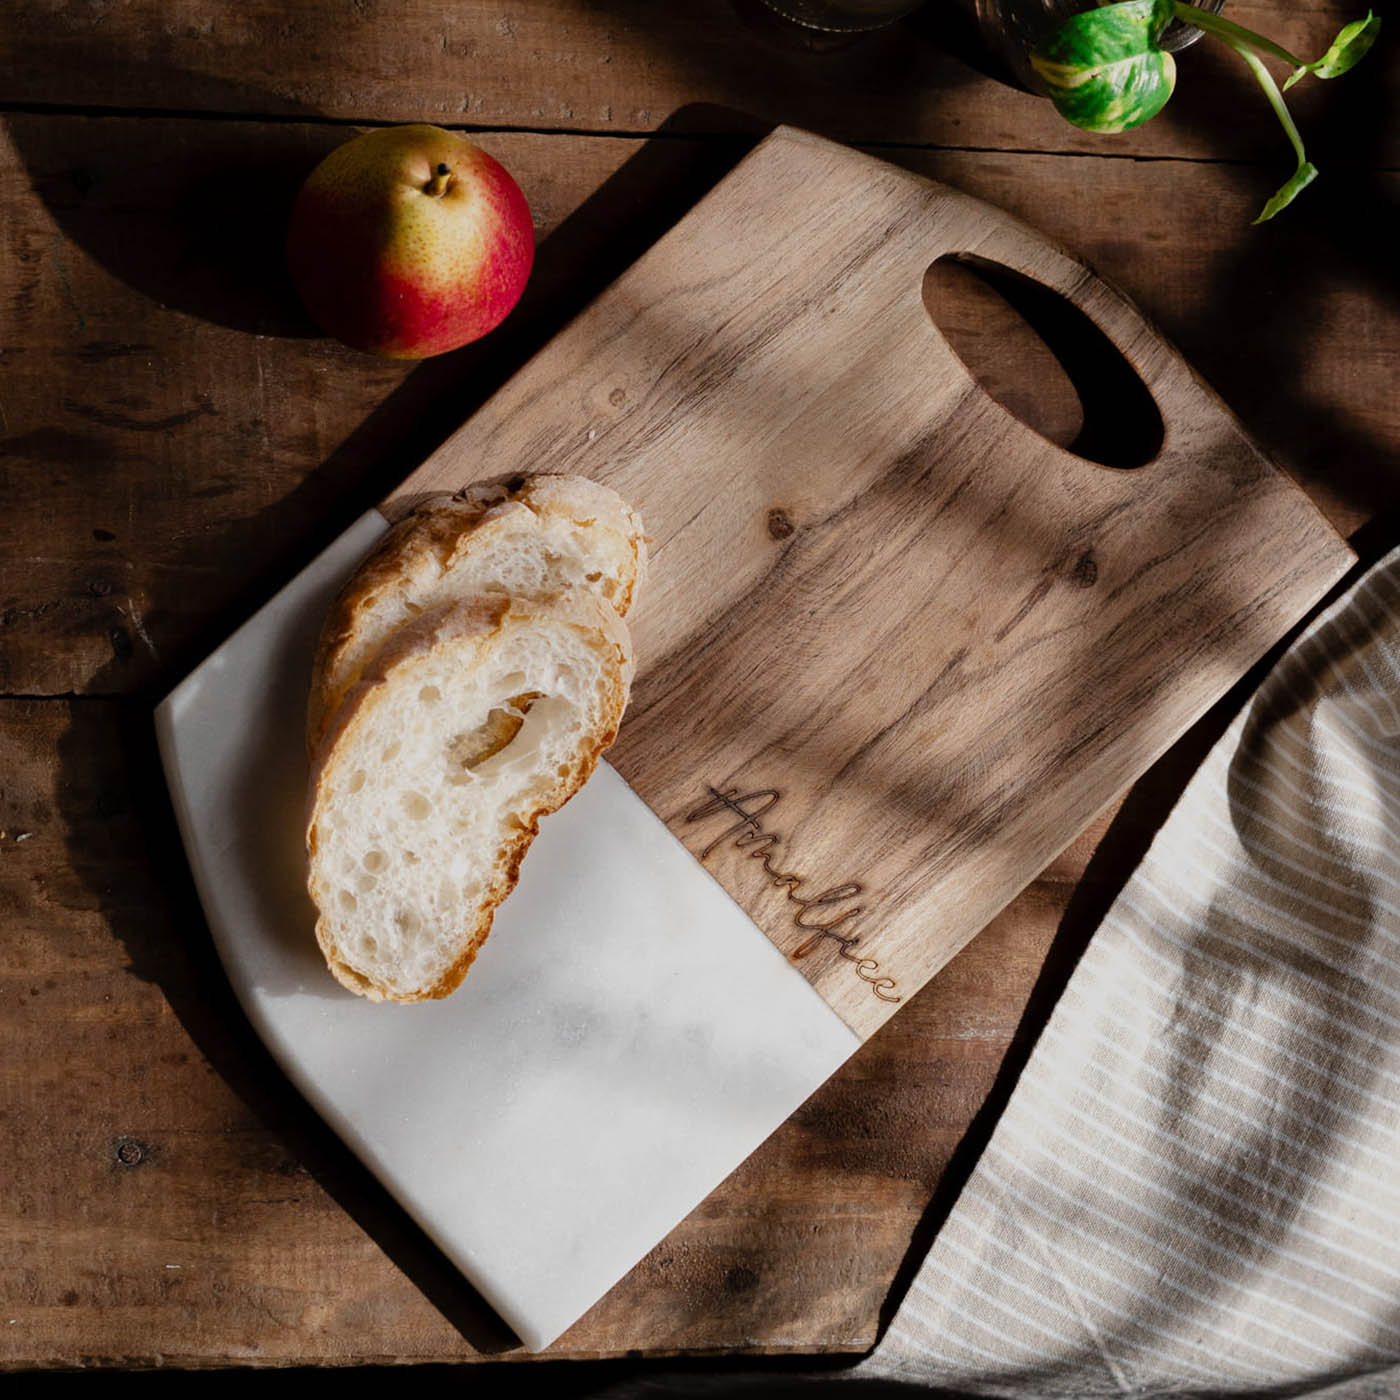 Marbluxe Wood Fusion Chopping and Serving Board